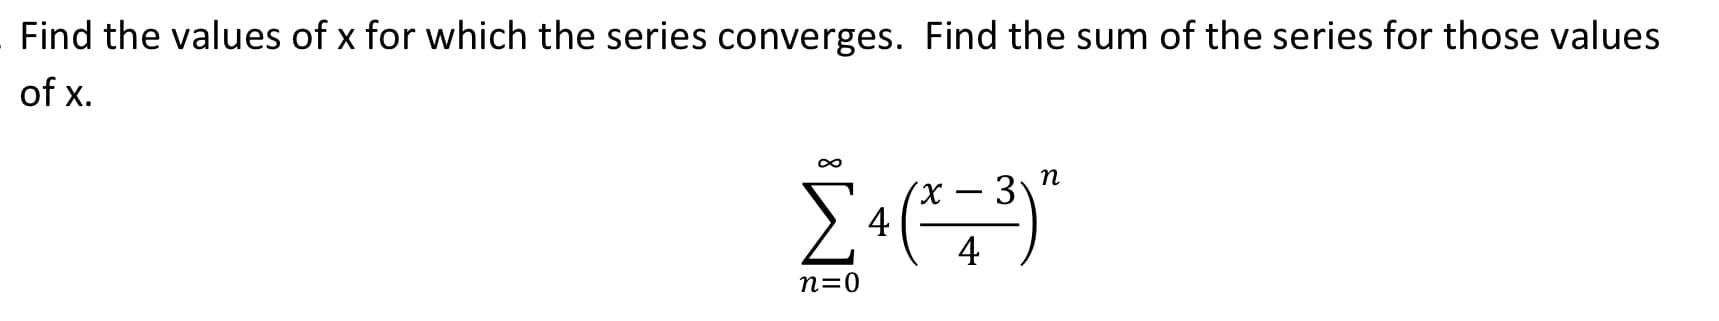 Find the values of x for which the series converges. Find the sum of the series for those values
of x.
3
n=0
